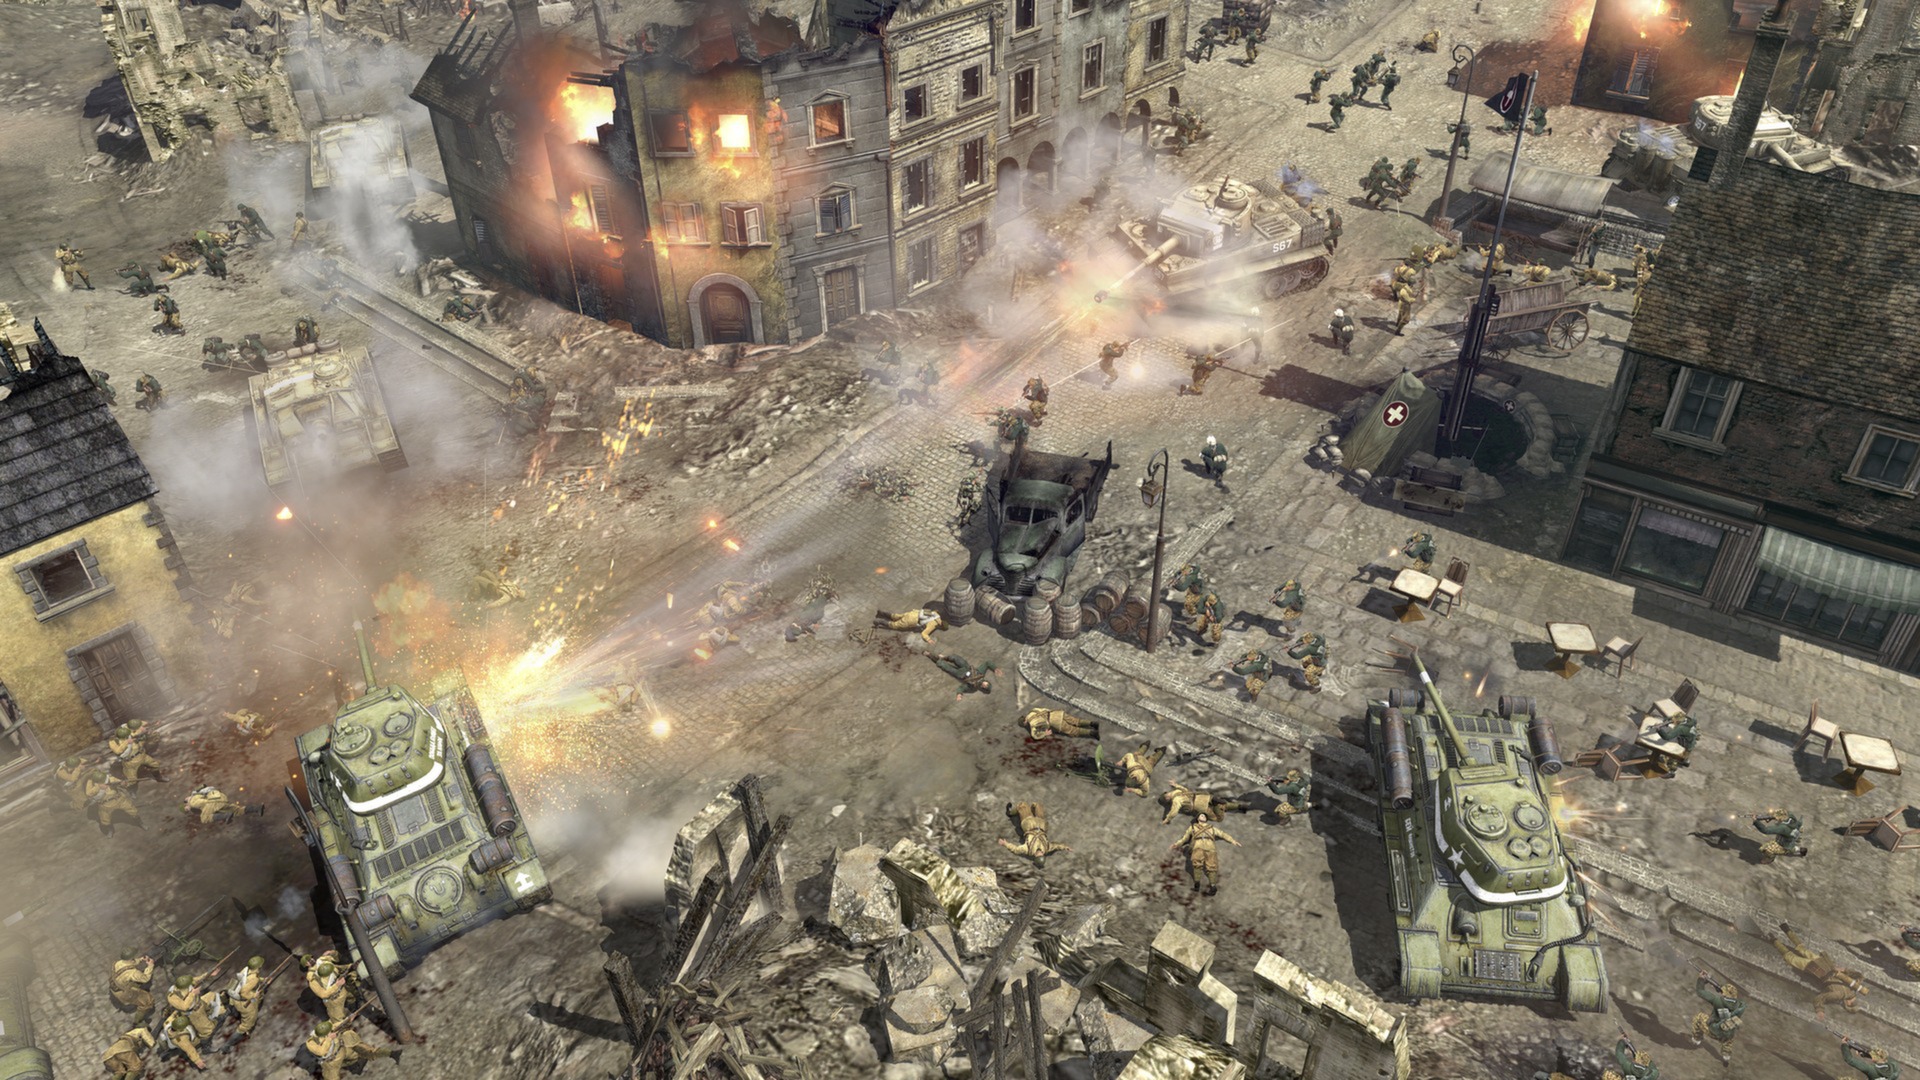 Company of Heroes 2 is free on the Humble Store